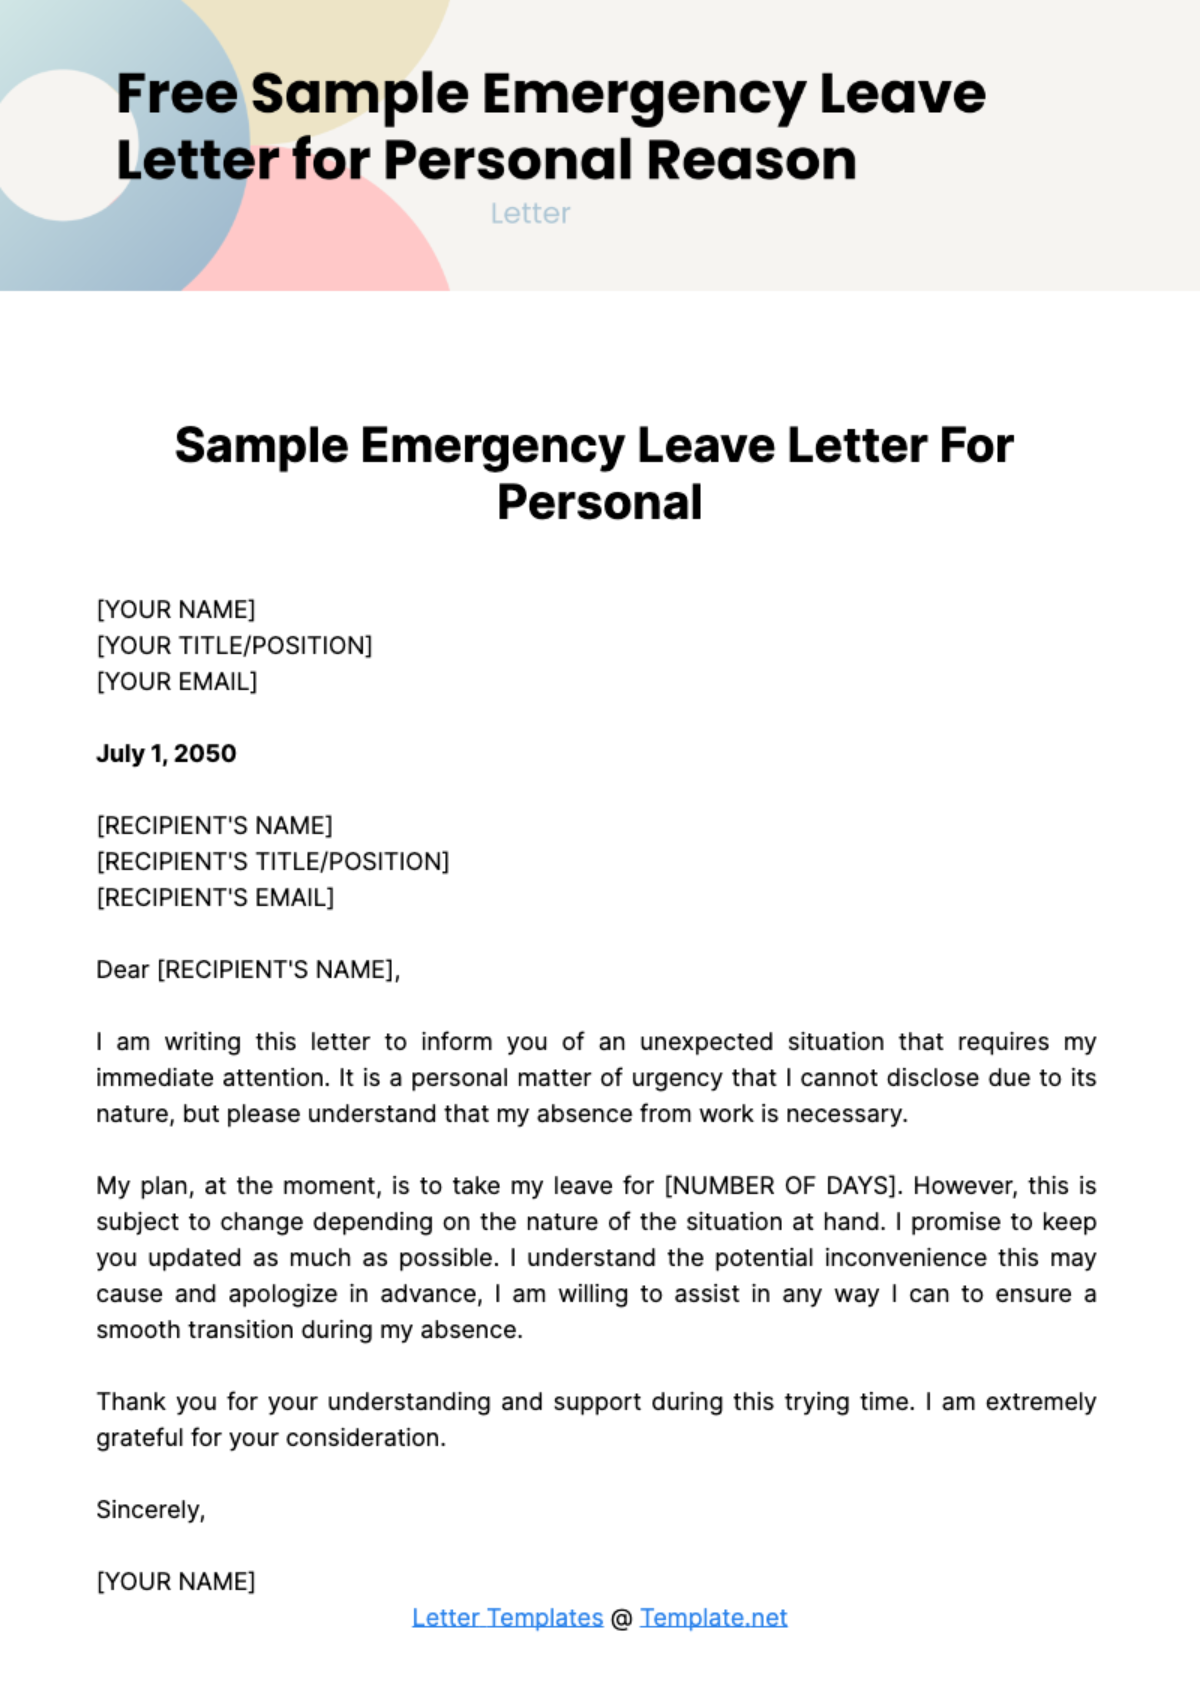 Free Sample Emergency Leave Letter for Personal Reason Template